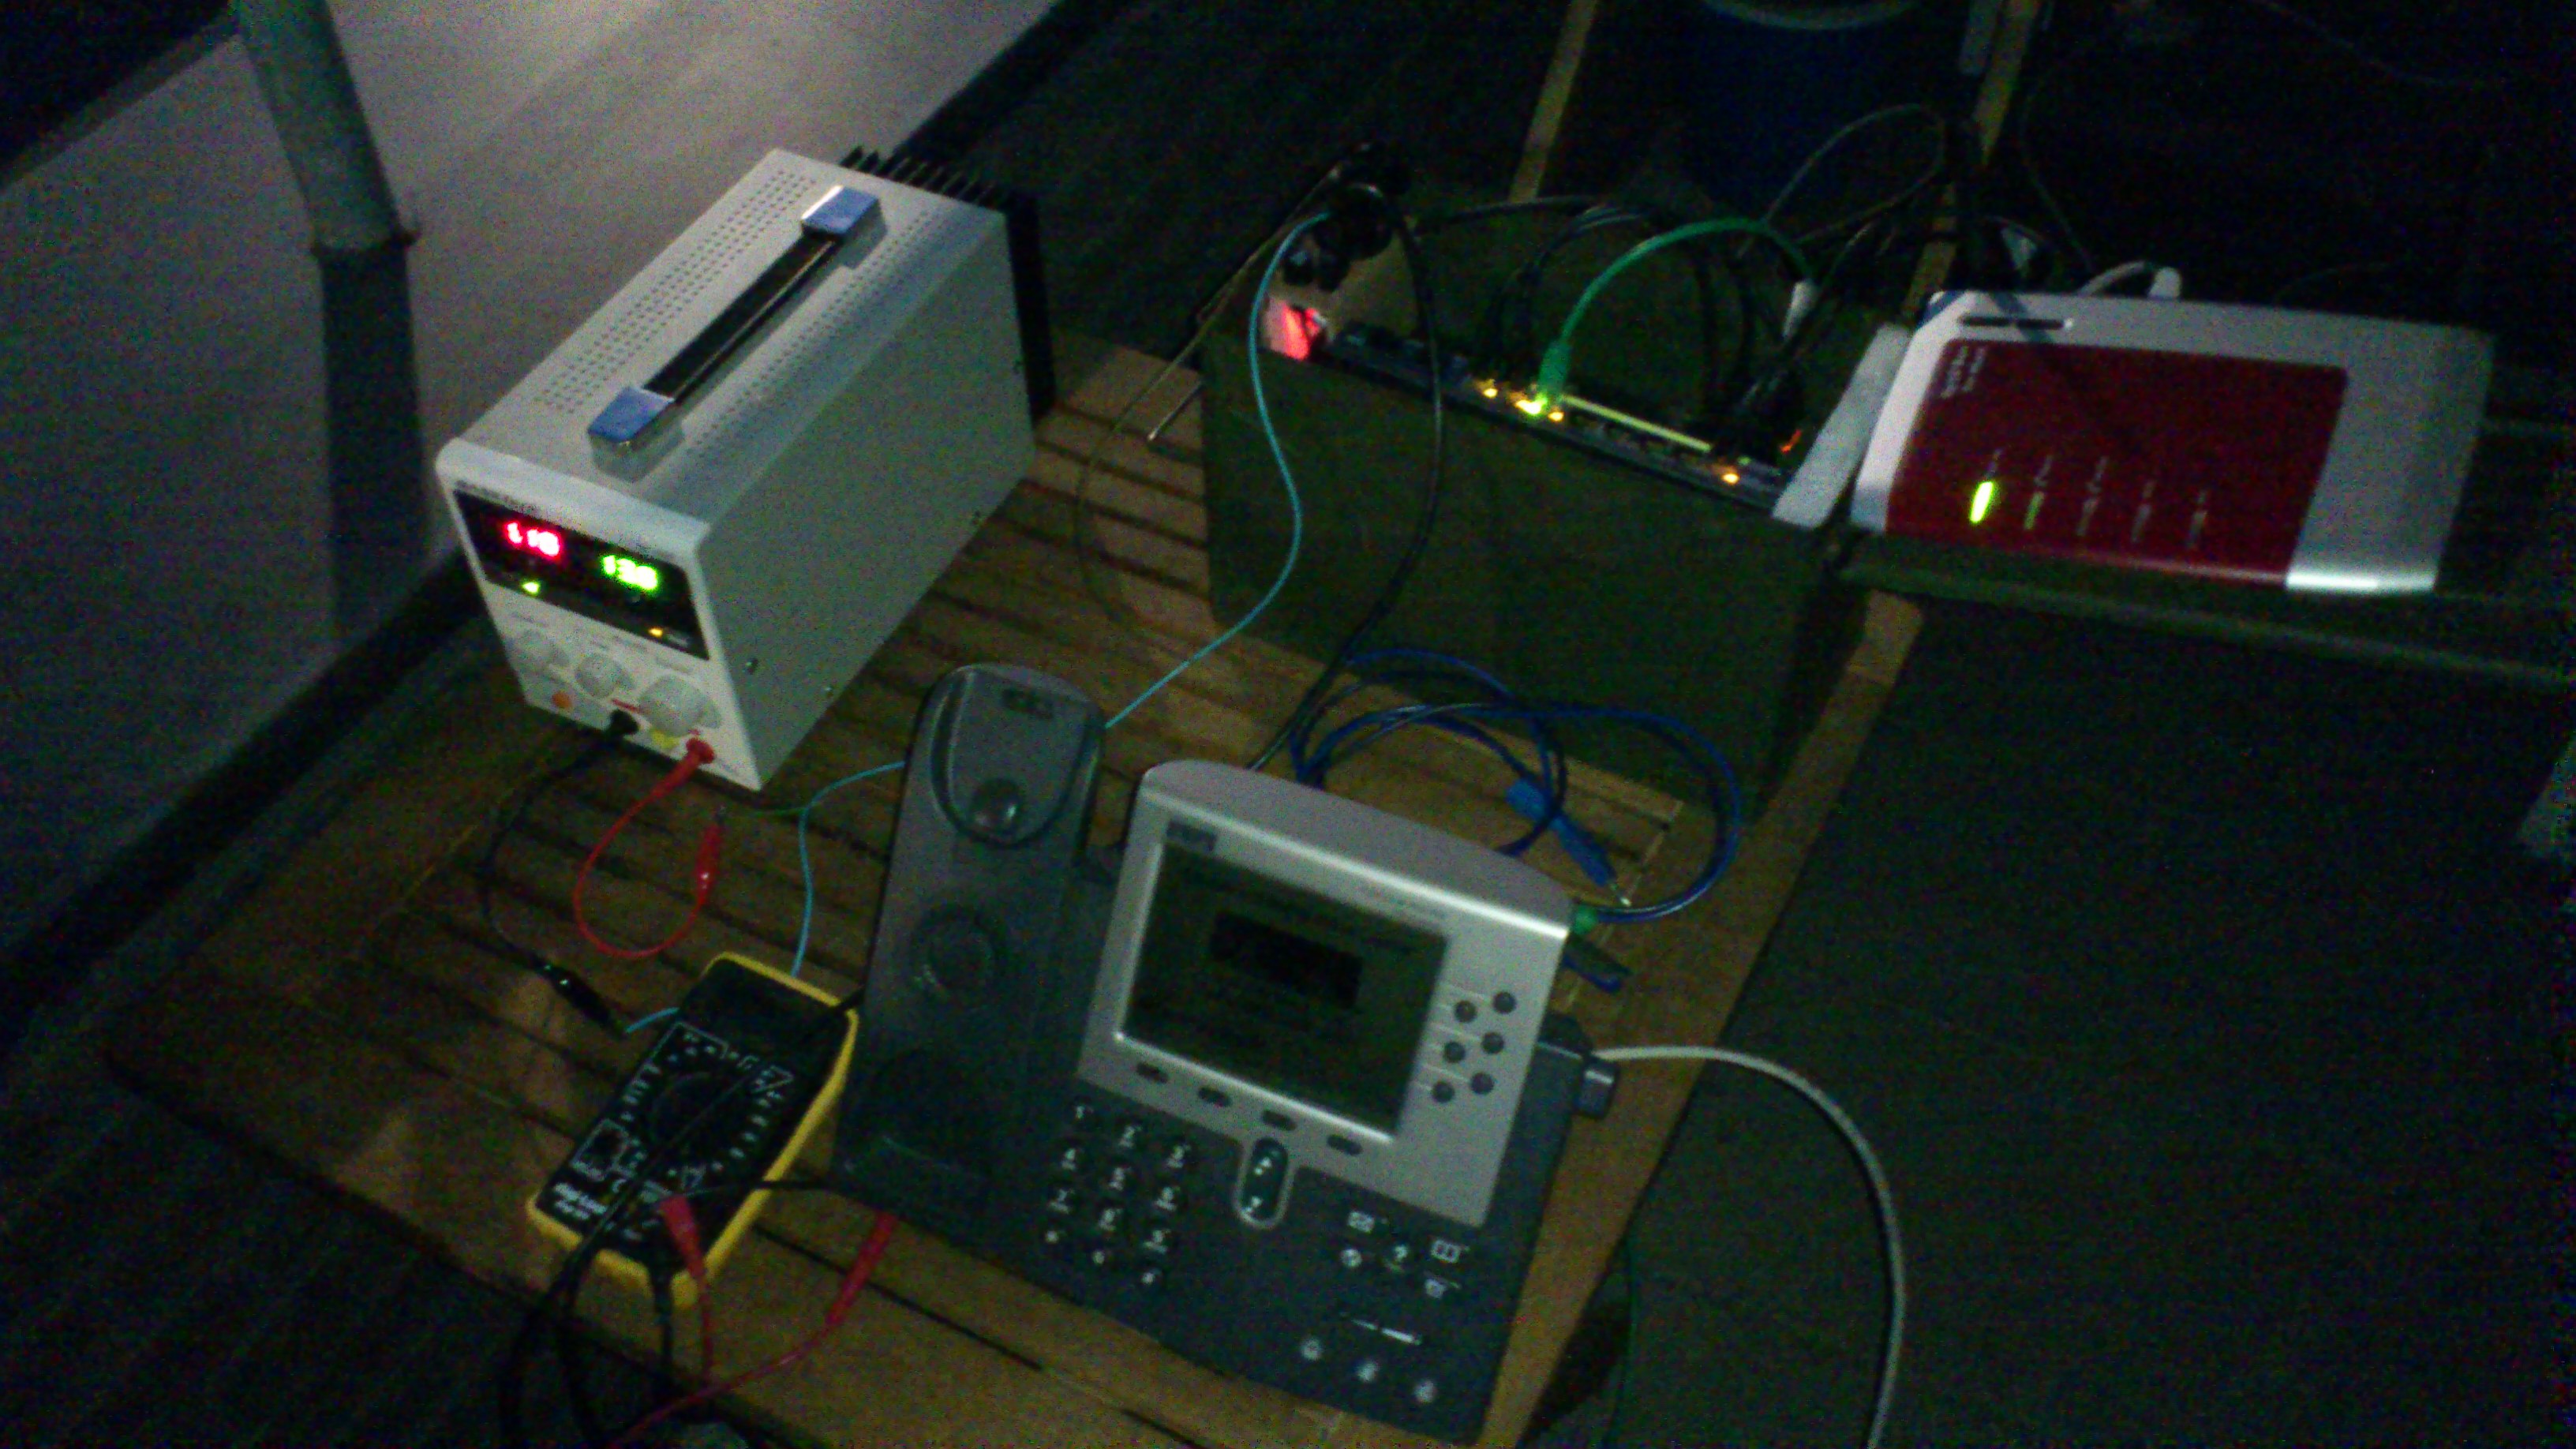 Complete Guerilla VoIP prototype running at 13.8V